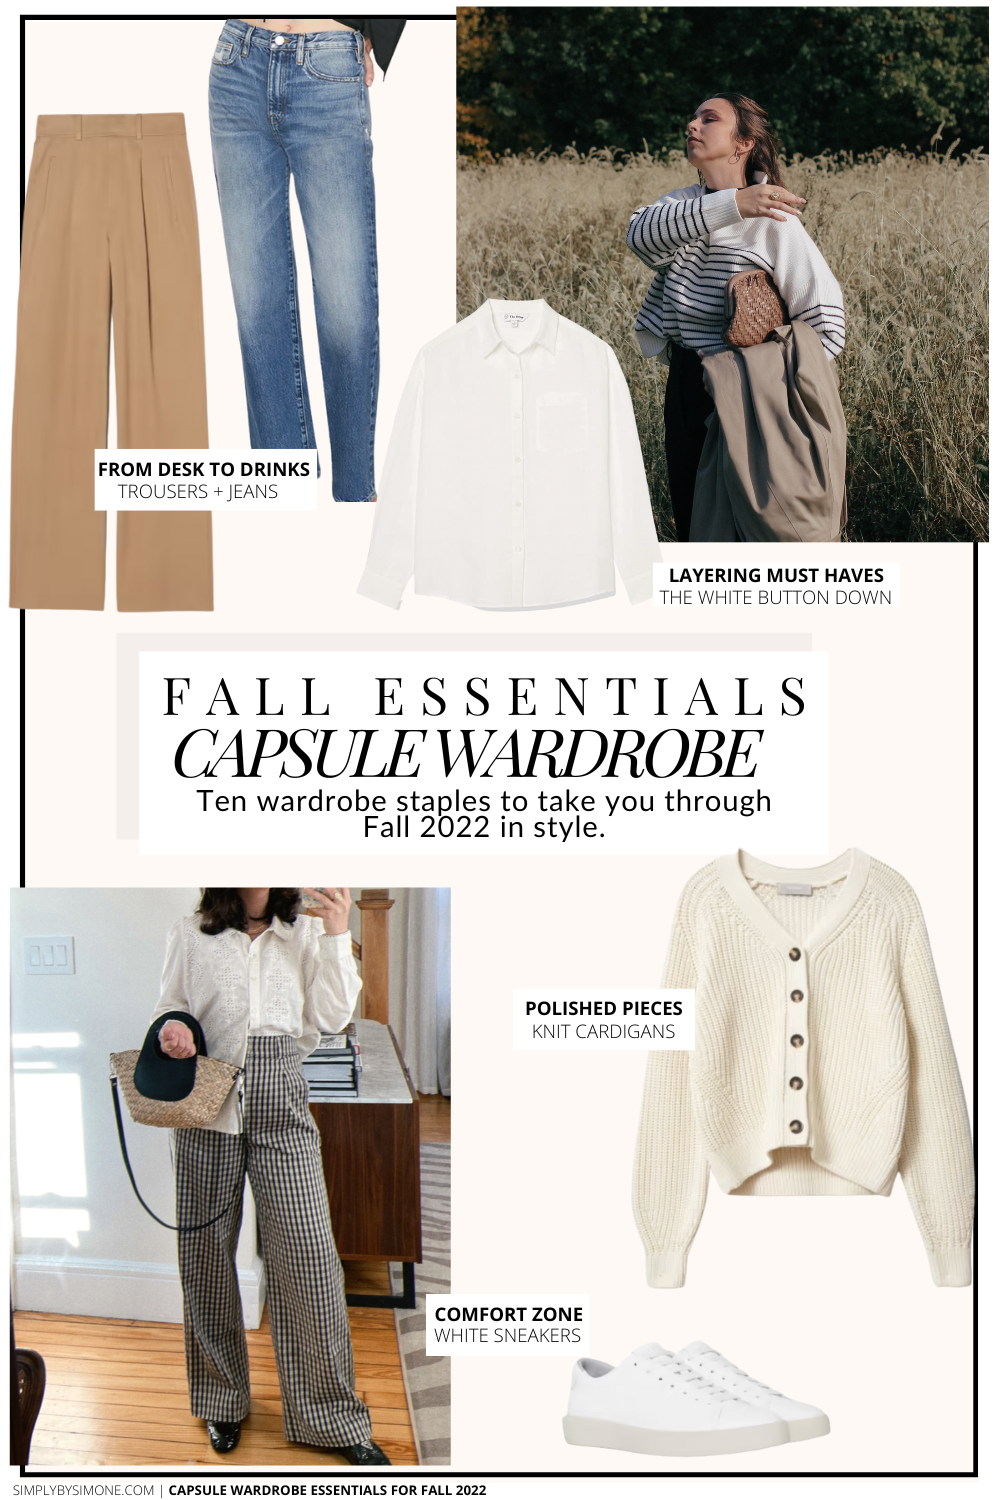 Capsule Wardrobe Essentials for Fall 2022 | 10 Essential Pieces | How to Build a Capsule Wardrobe | Fall Clothes | Outfit Inspiration | Fall Weather Outfit Ideas | Fall Vacation Packing Guide | Fall Capsule Wardrobe - What To Wear This Fall 2022 | Parisian Outfit Ideas | Cover Image | Simply by Simone